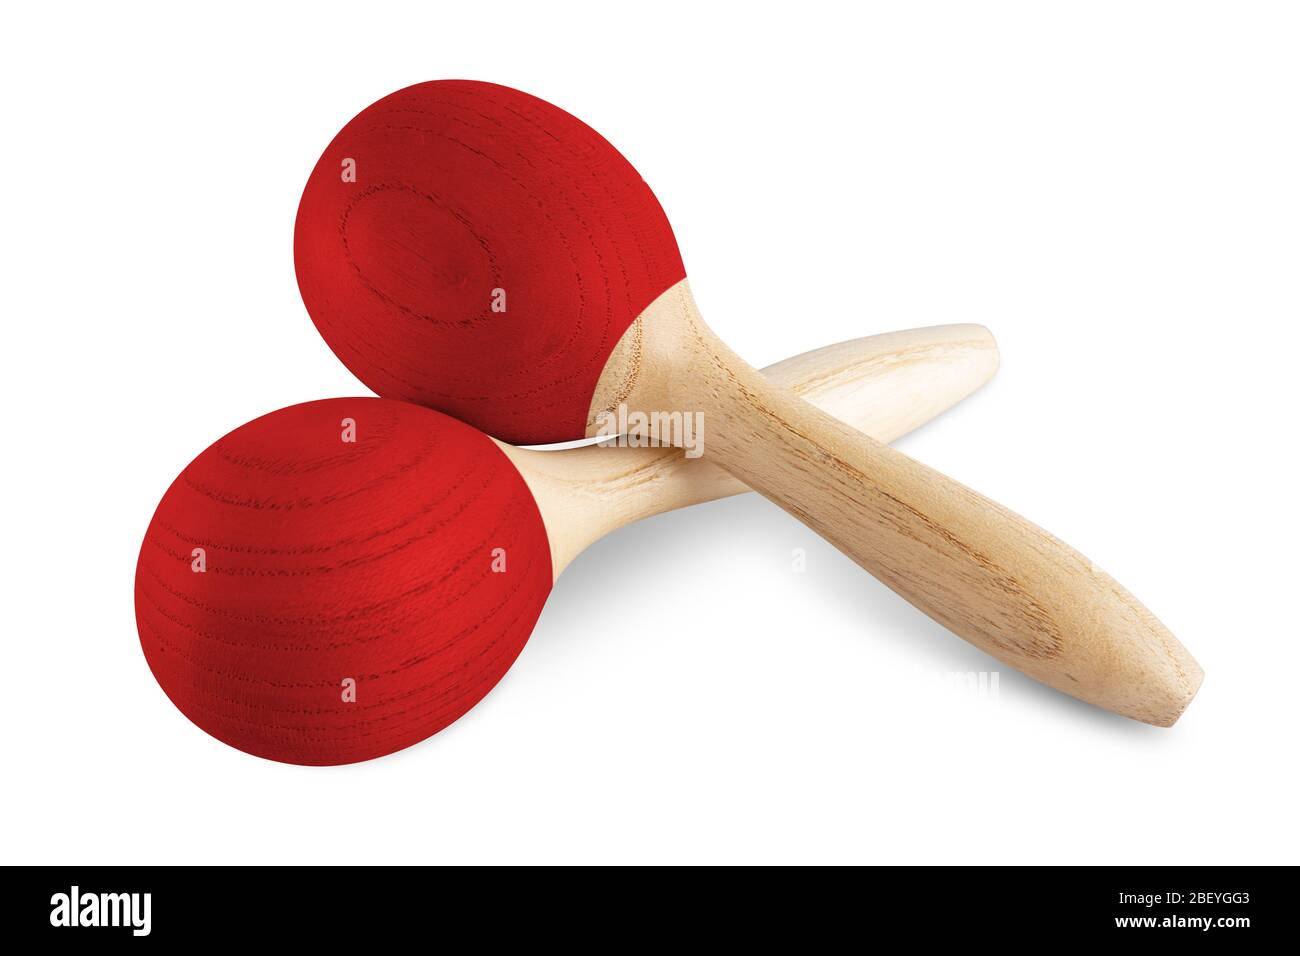 Pair of red wooden maracas hand shaker music instrument isolated on white background. rattle percussion carnival rythm party concept. Stock Photo